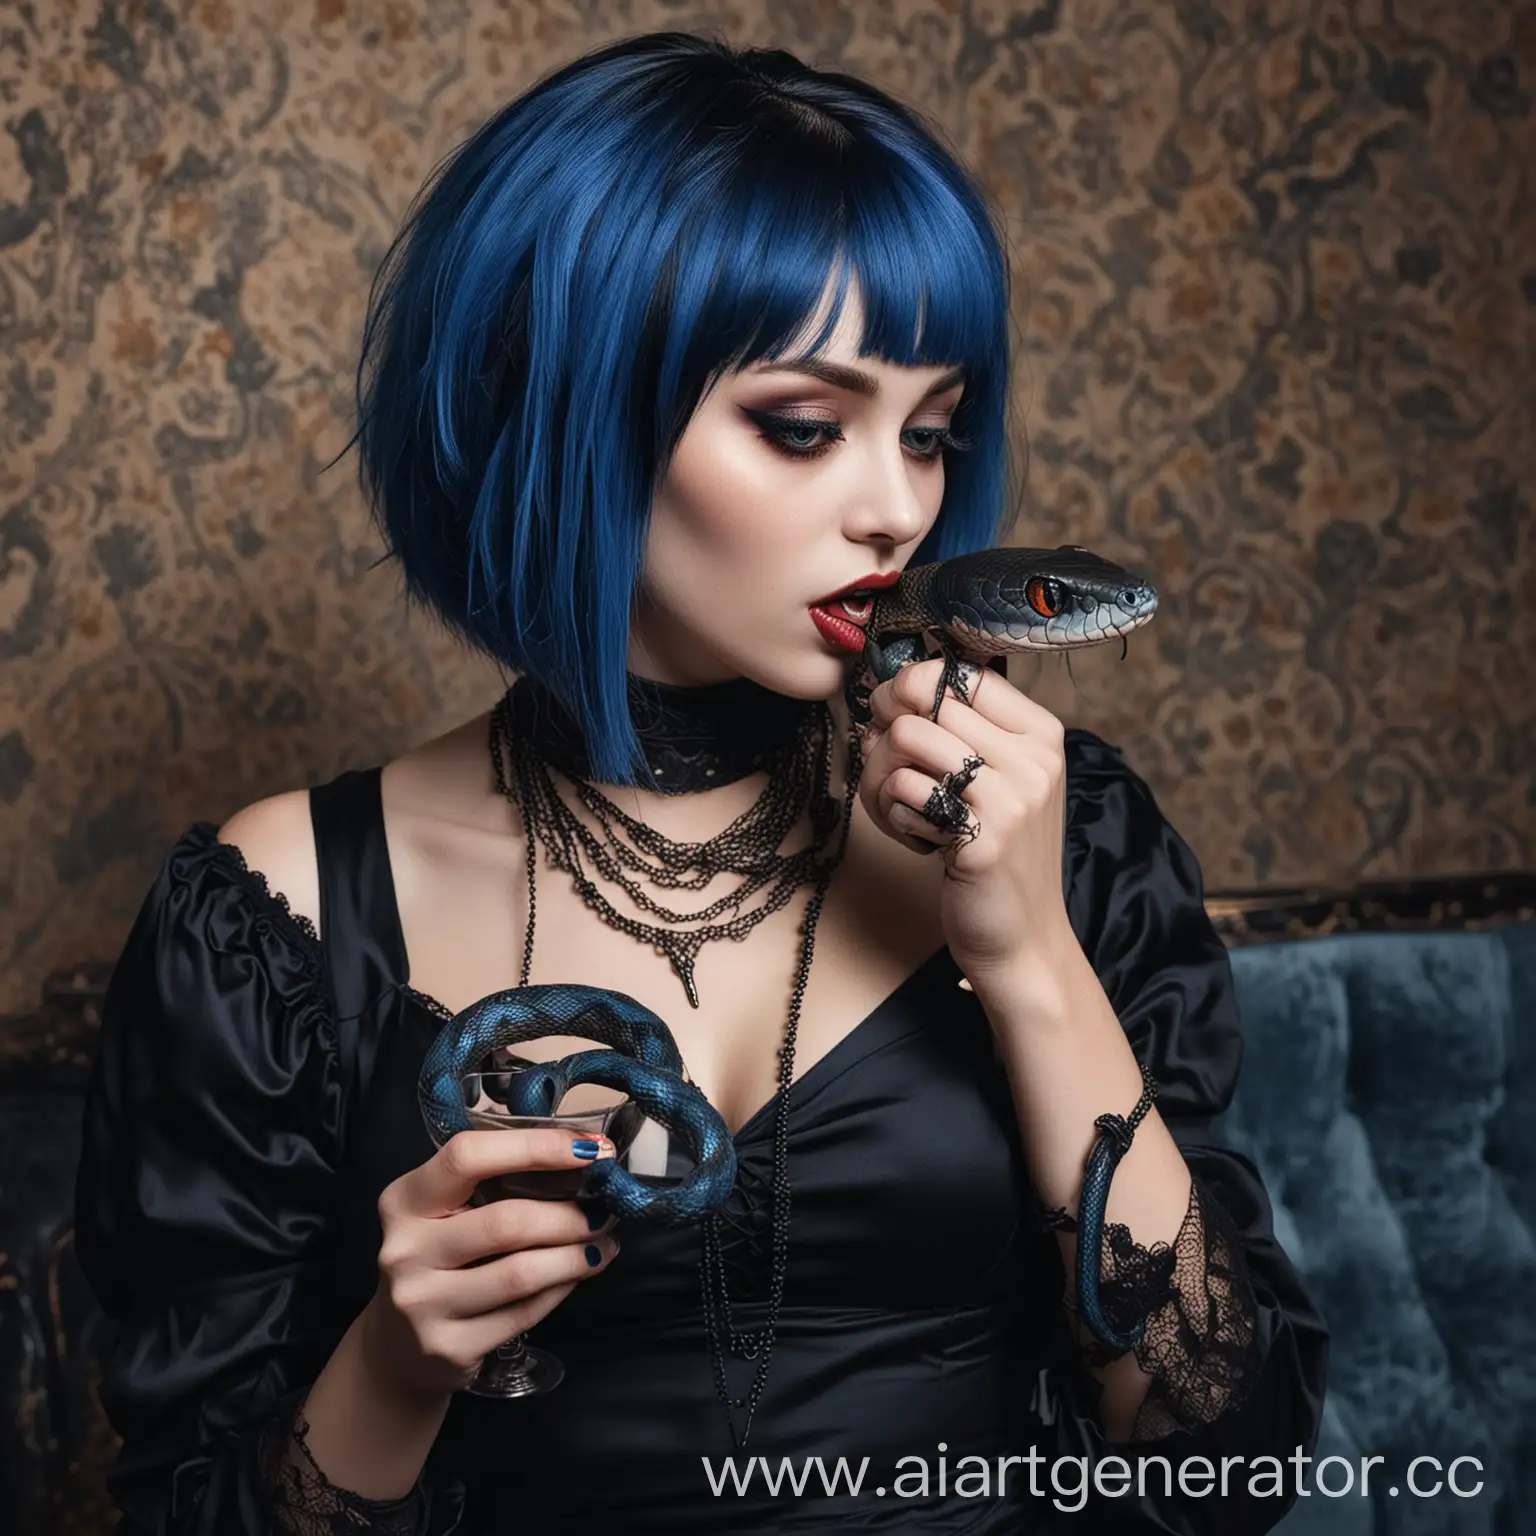 Mysterious-Vampire-Girl-with-Blue-Bob-Hairstyle-and-Pet-Snake